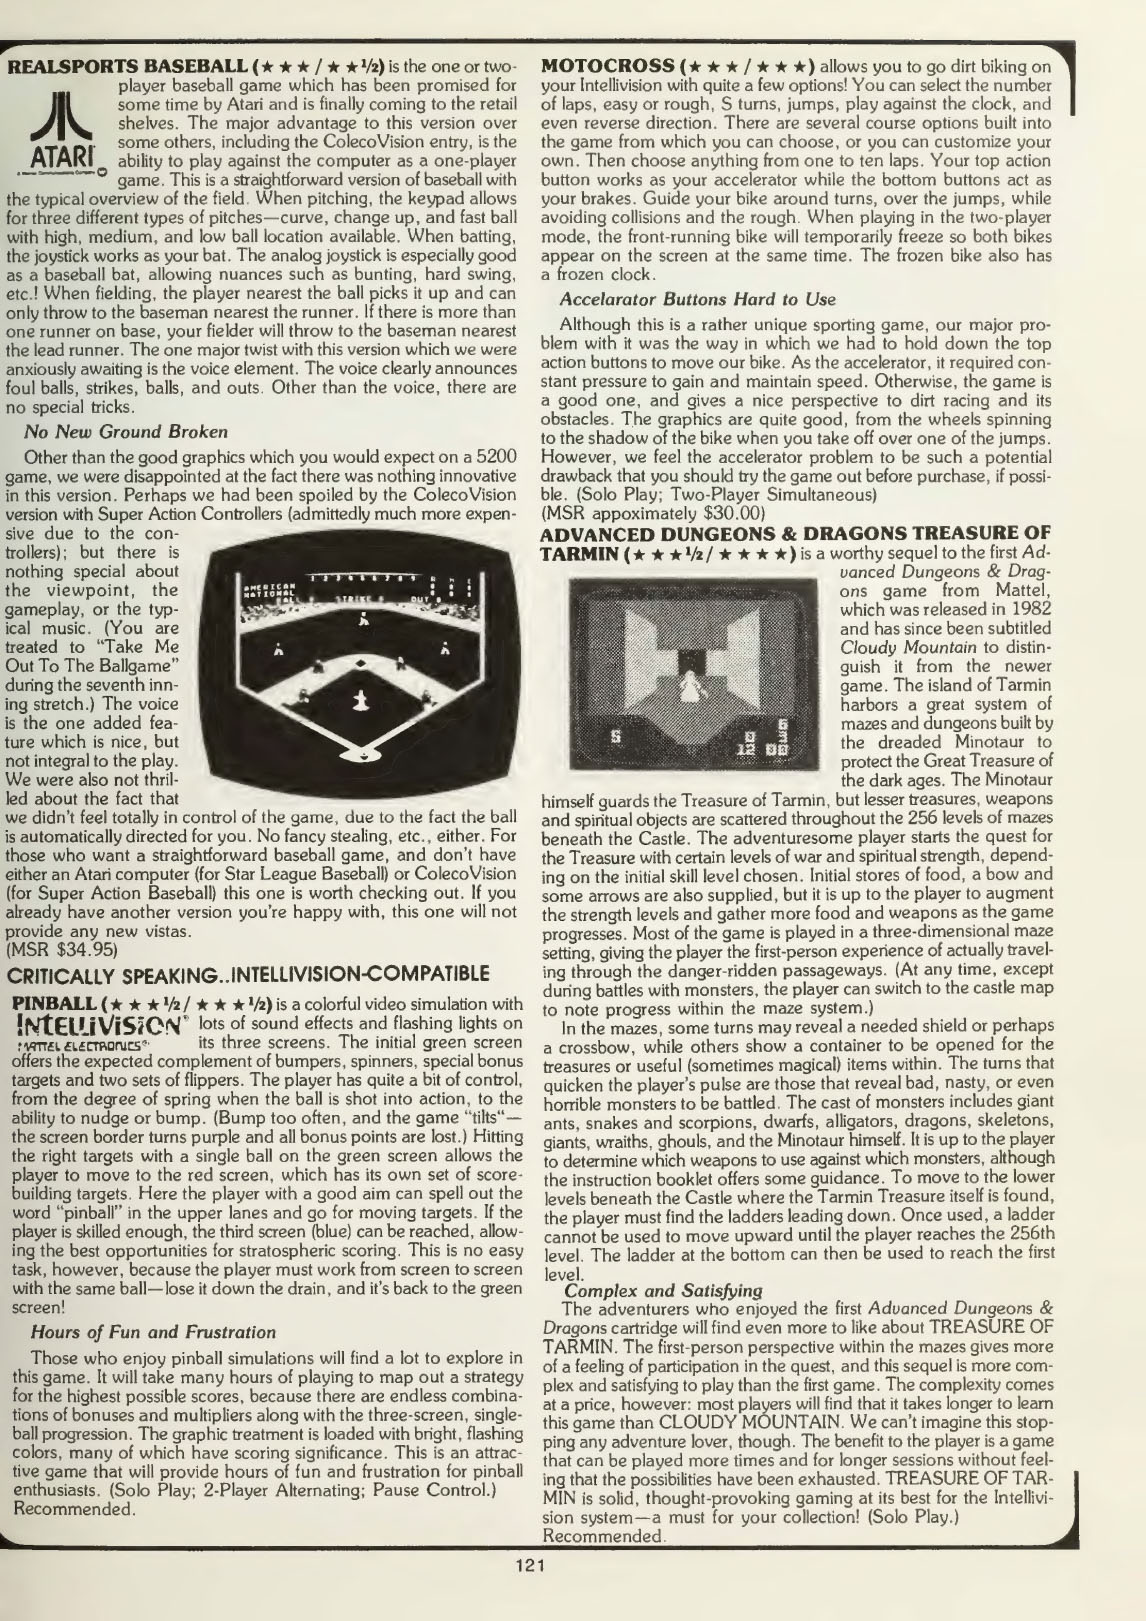 RealSports Baseball Review, Video Game Update November 1983 page 0